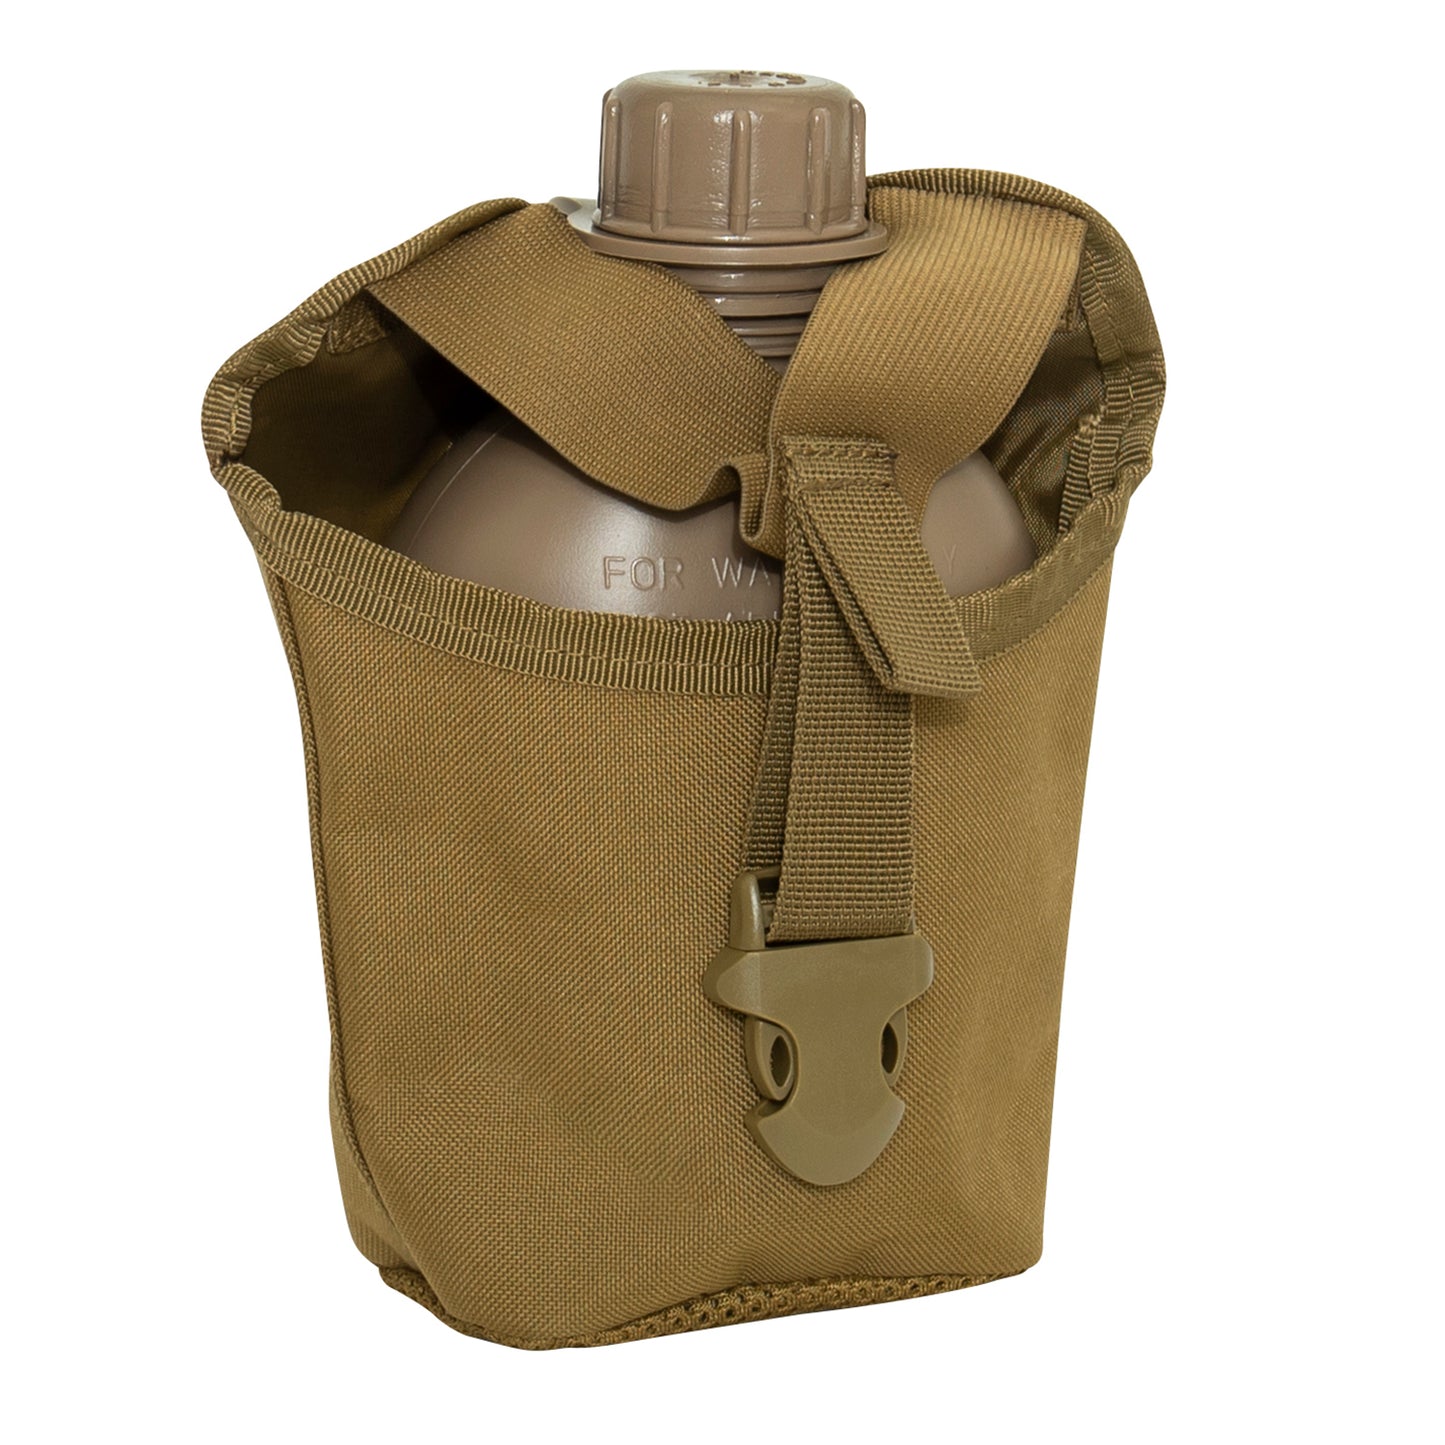 Rothco MOLLE Compatible 1 Quart Canteen Pouch Cover